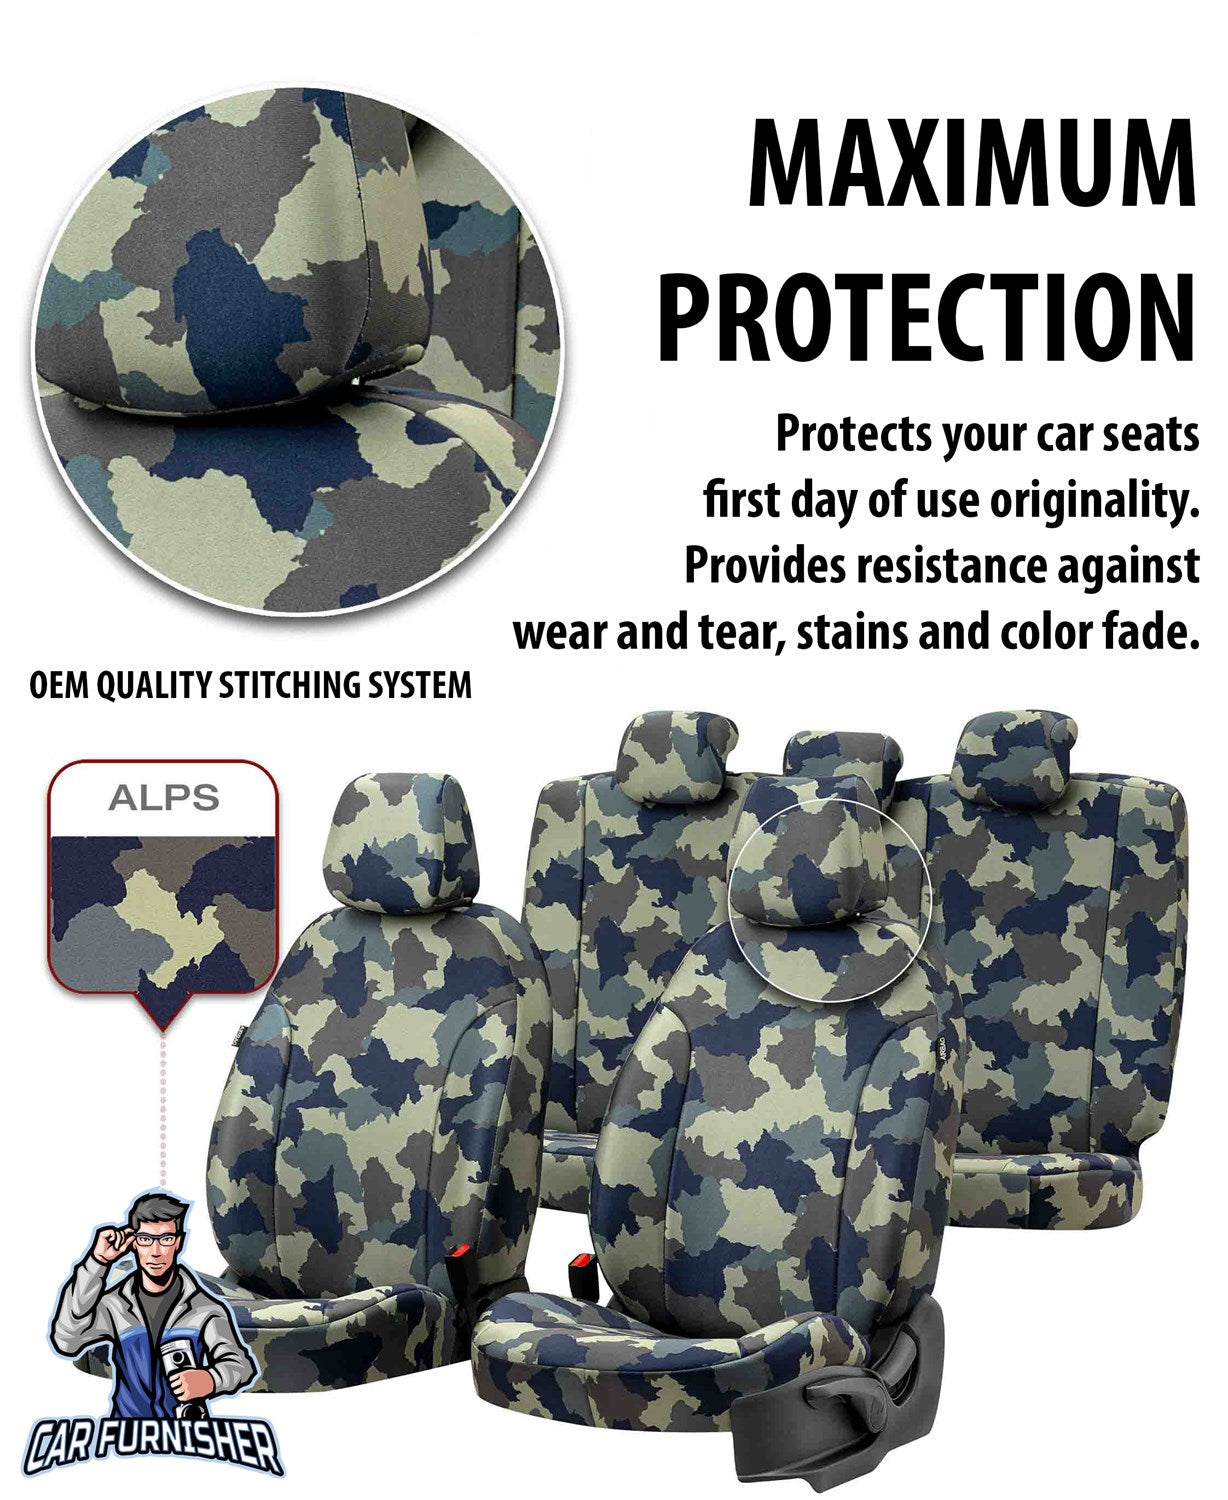 Dacia Lodgy Seat Covers Camouflage Waterproof Design Montblanc Camo Waterproof Fabric